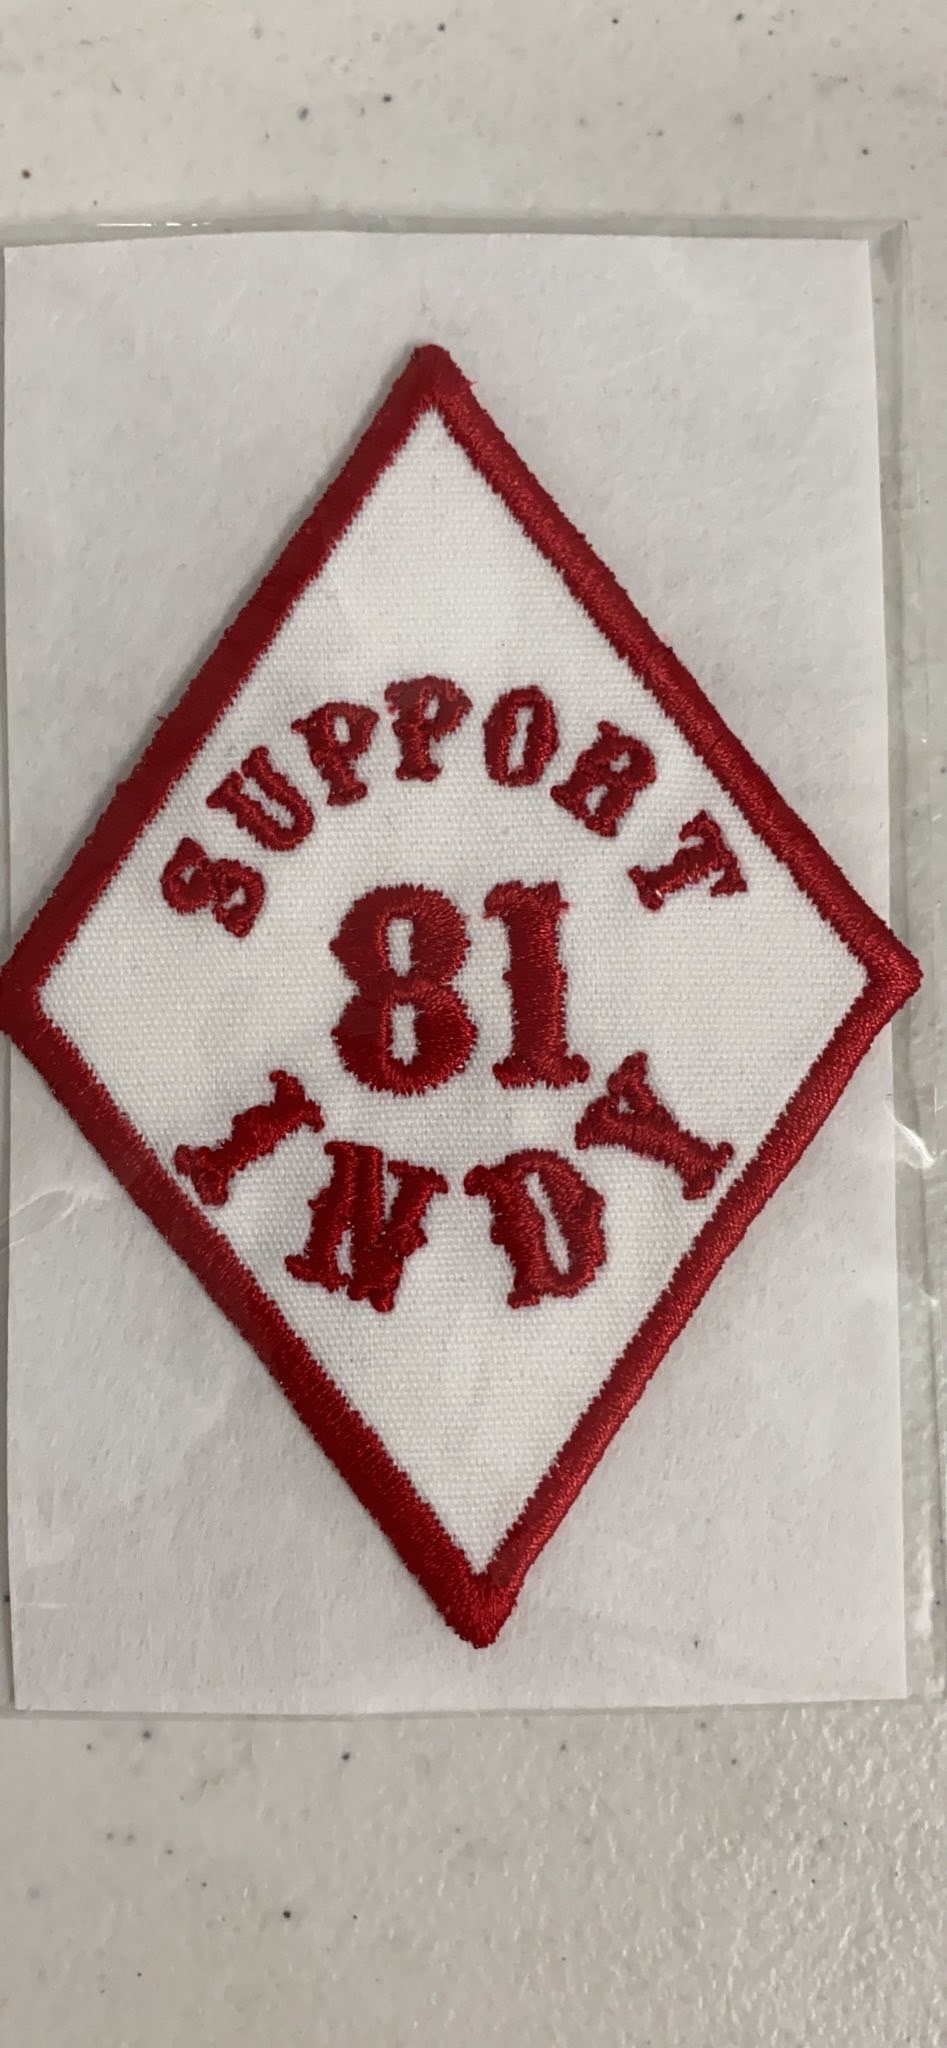 Image of Support INDY patch